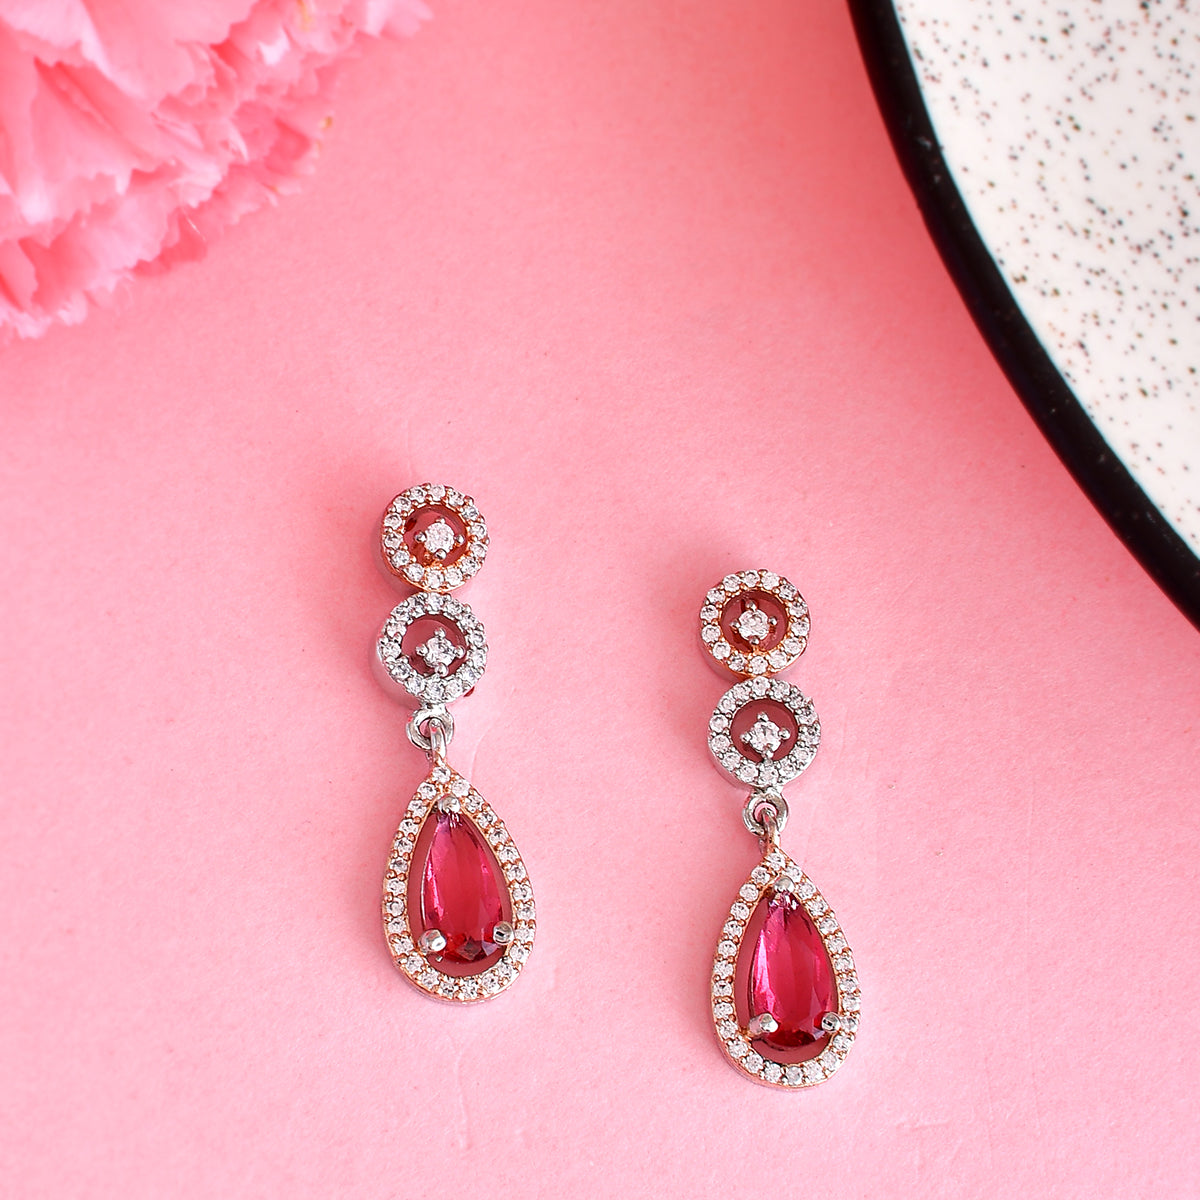 Buy Voylla CZ White and Pink Gems Earrings Online at Low Prices in India -  Paytmmall.com